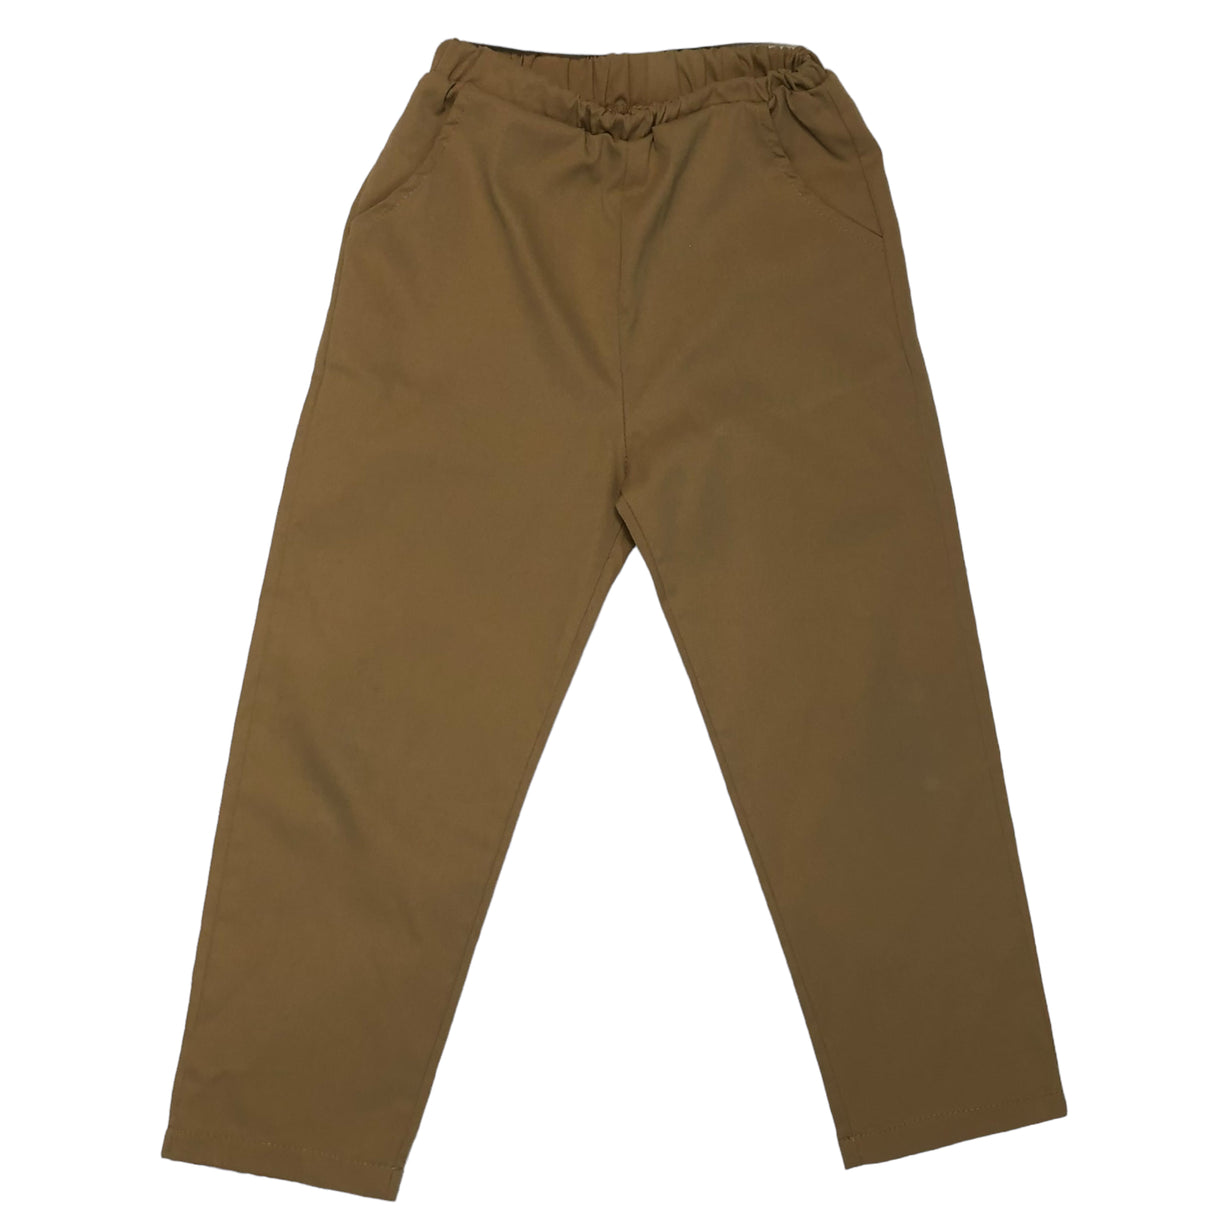 A second Chance - Shein Set -Brown  Pant & White Shirt ( 4 ) Kids - Delivery All Over Lebanon